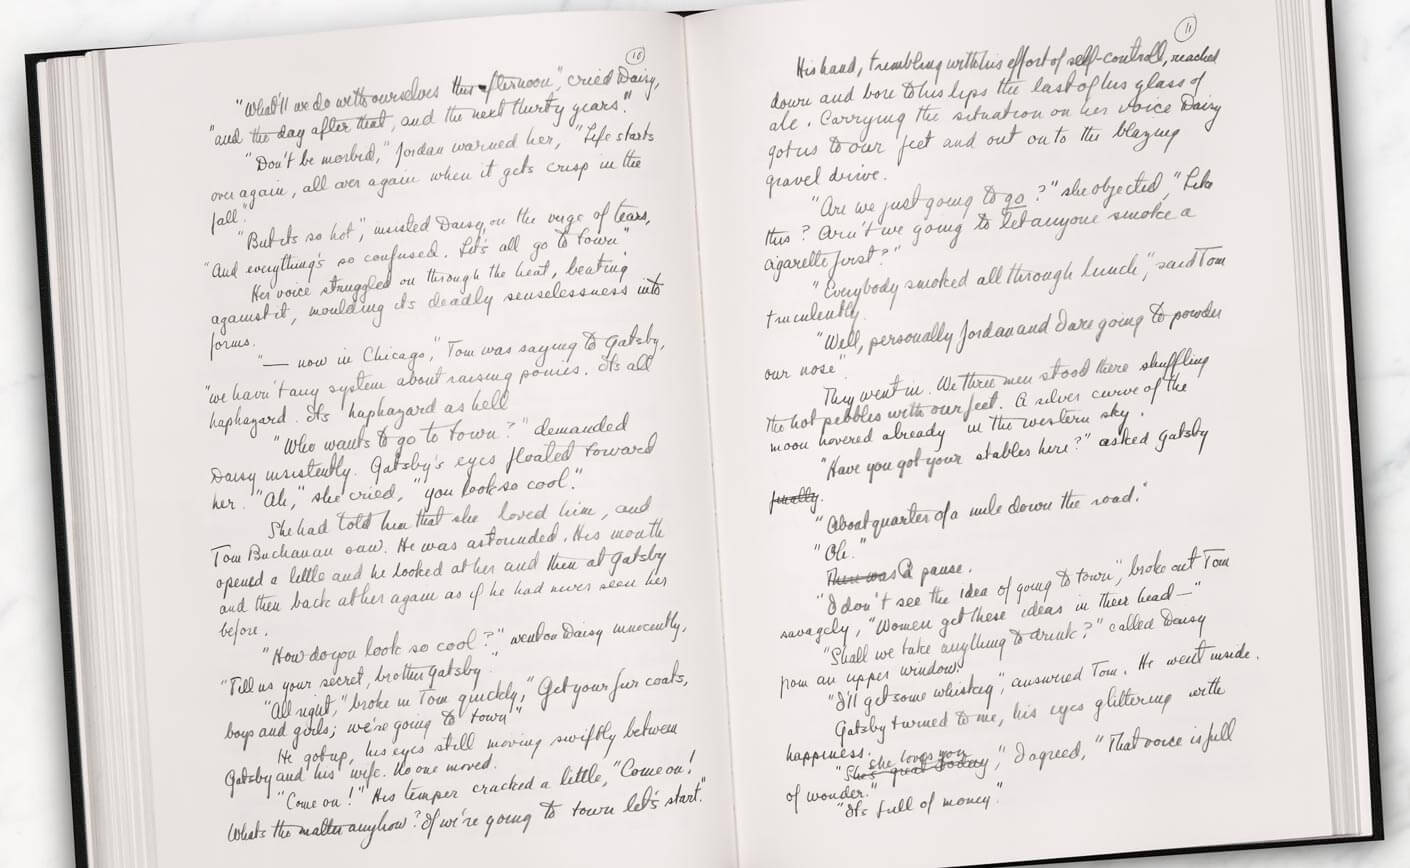 the manuscript of The Great Gatsby by Scott Fitzgerald